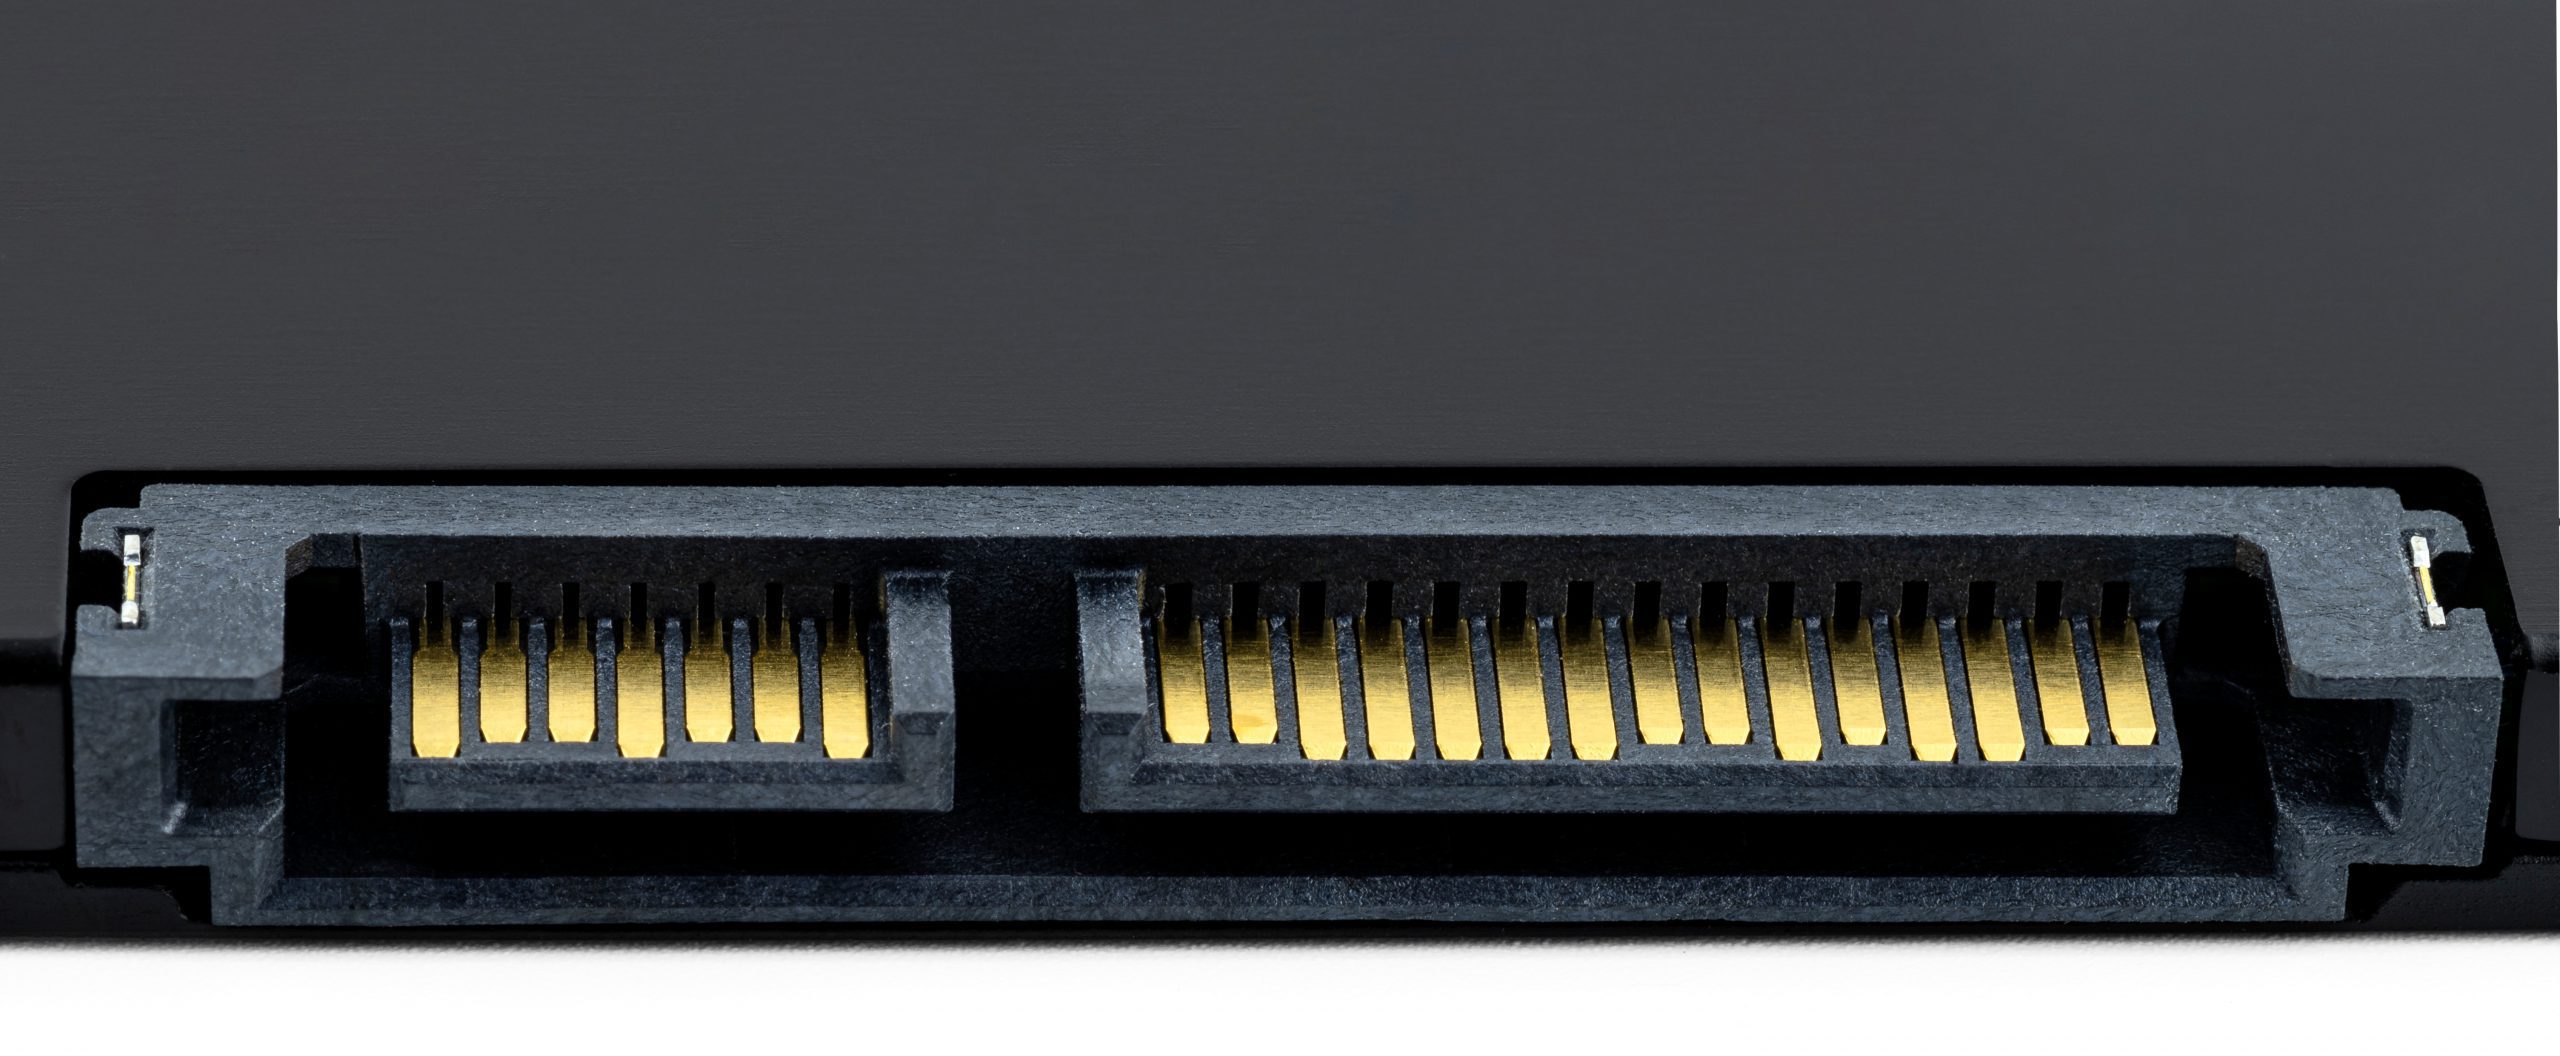 SATA connector for Solid State Drive